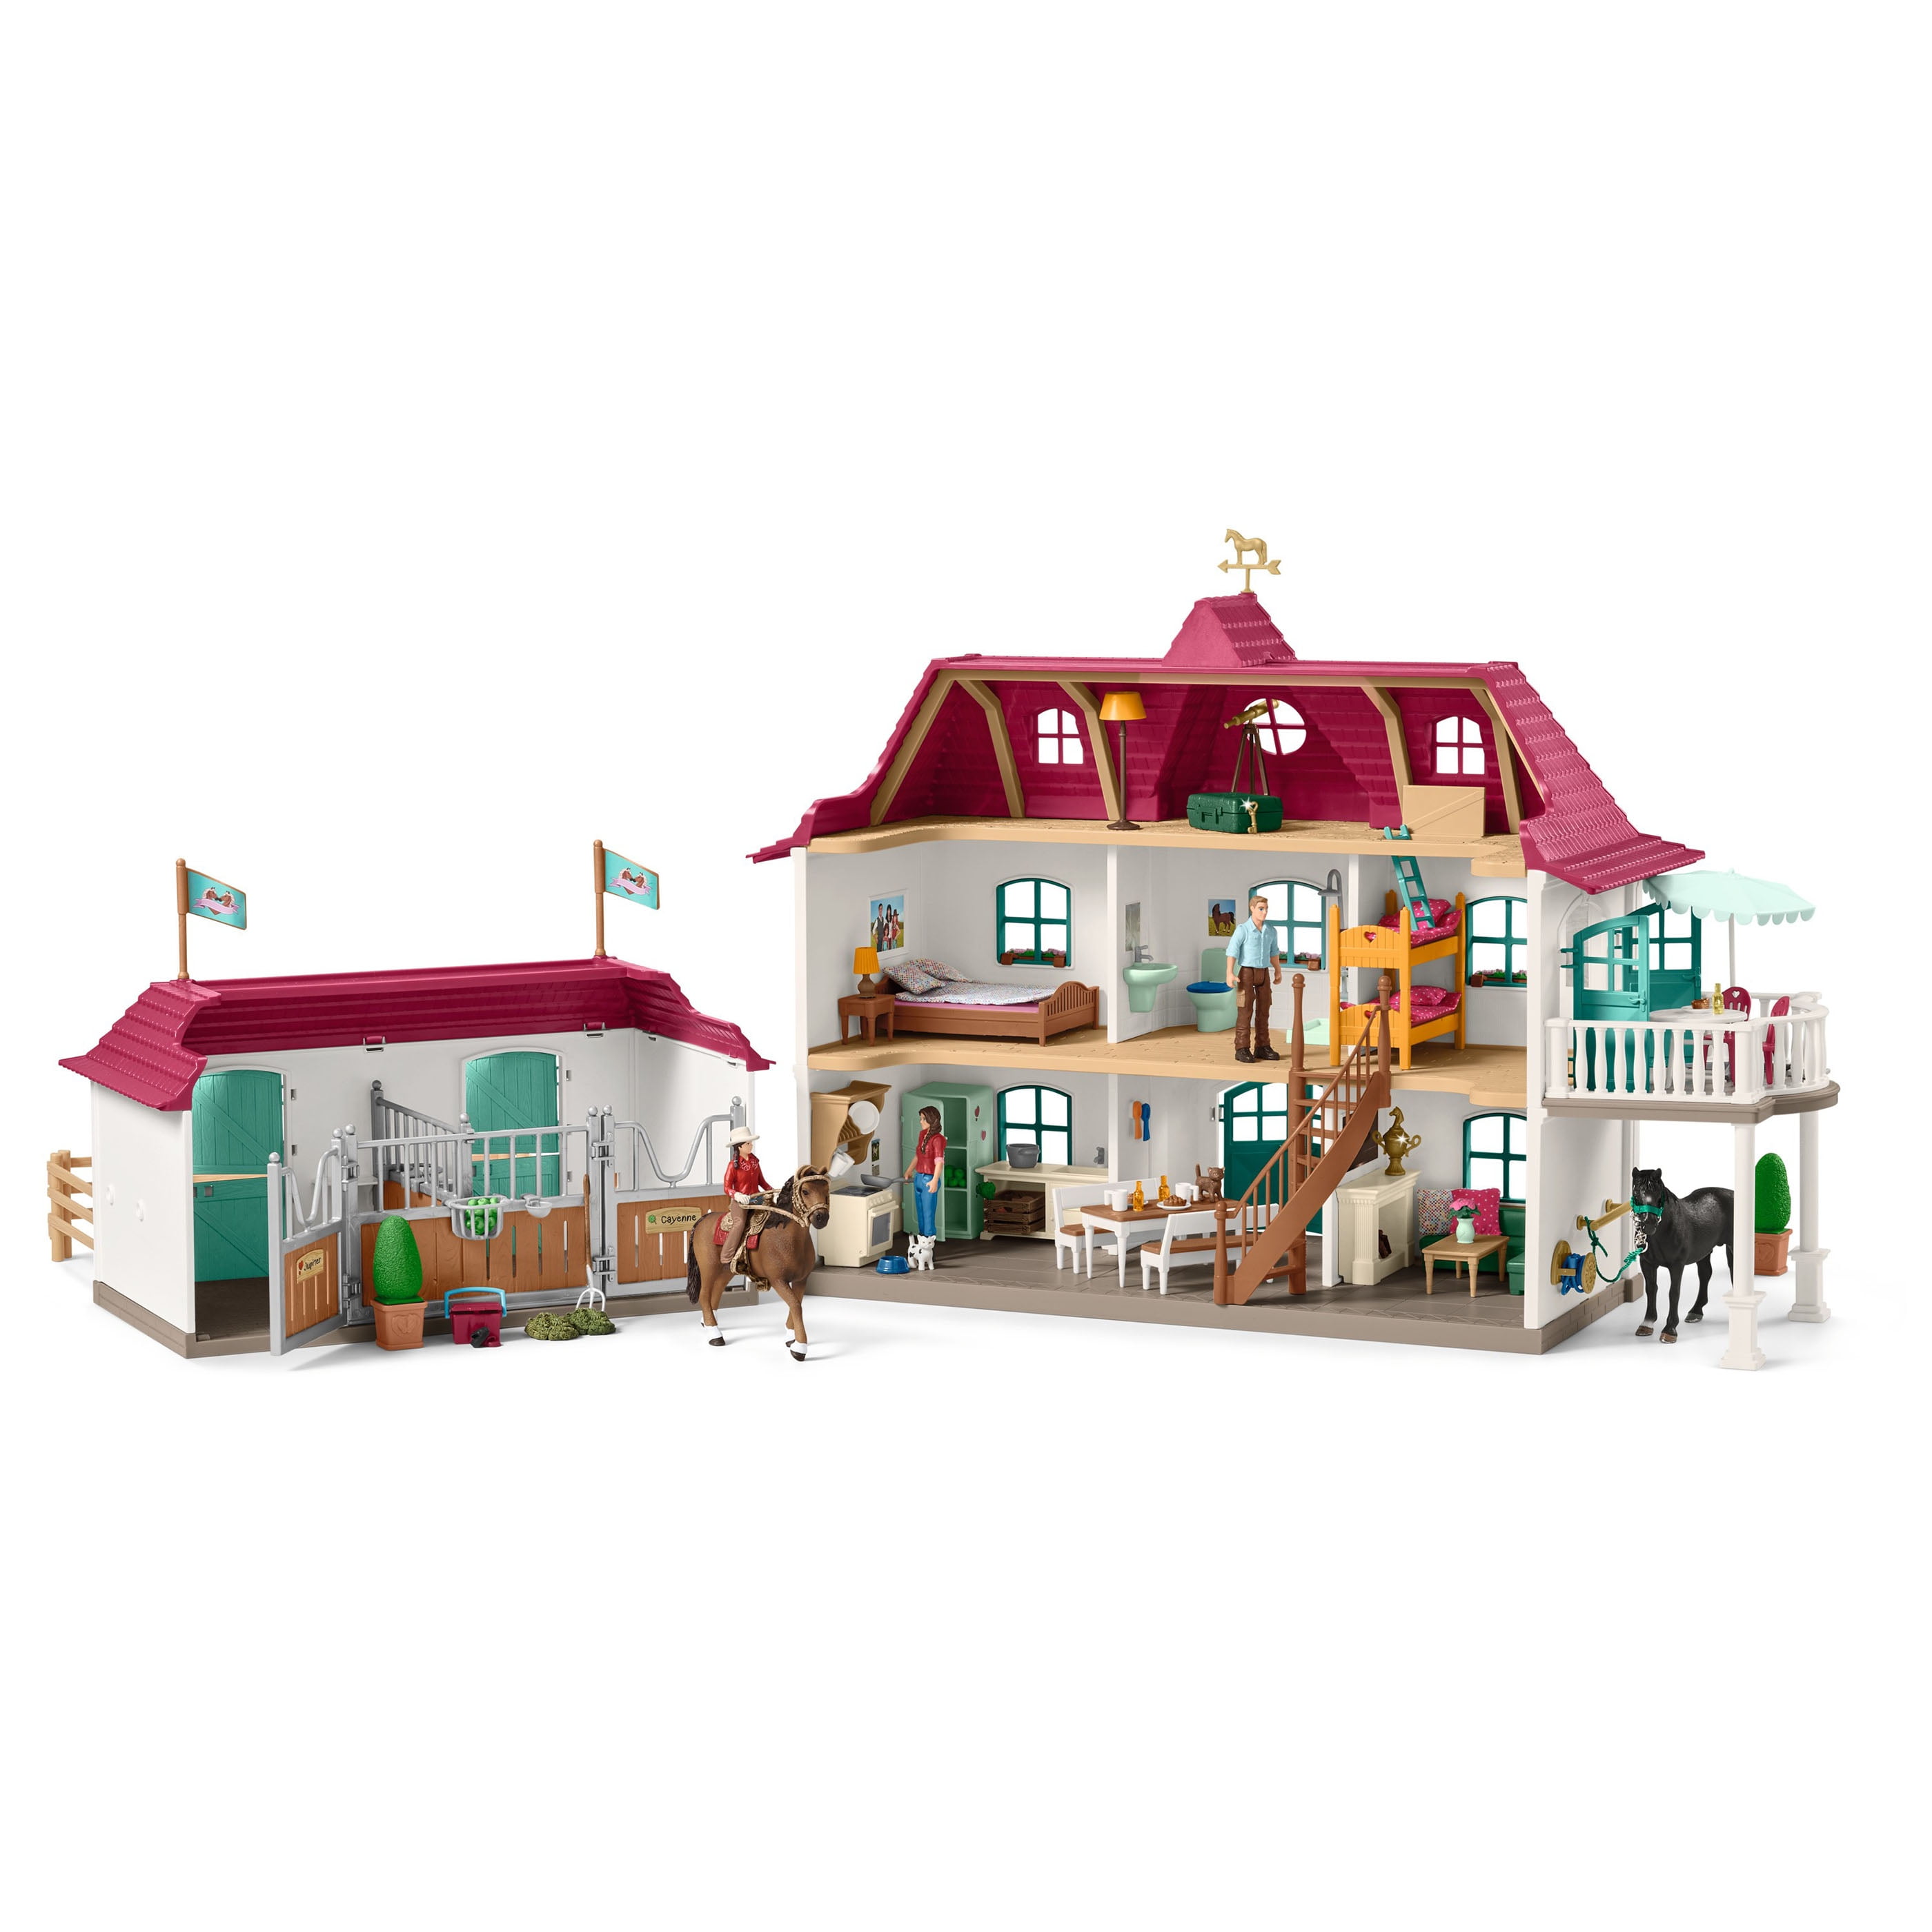 Schleich 42416 Large Horse Stable with House & Stable NEW!! 